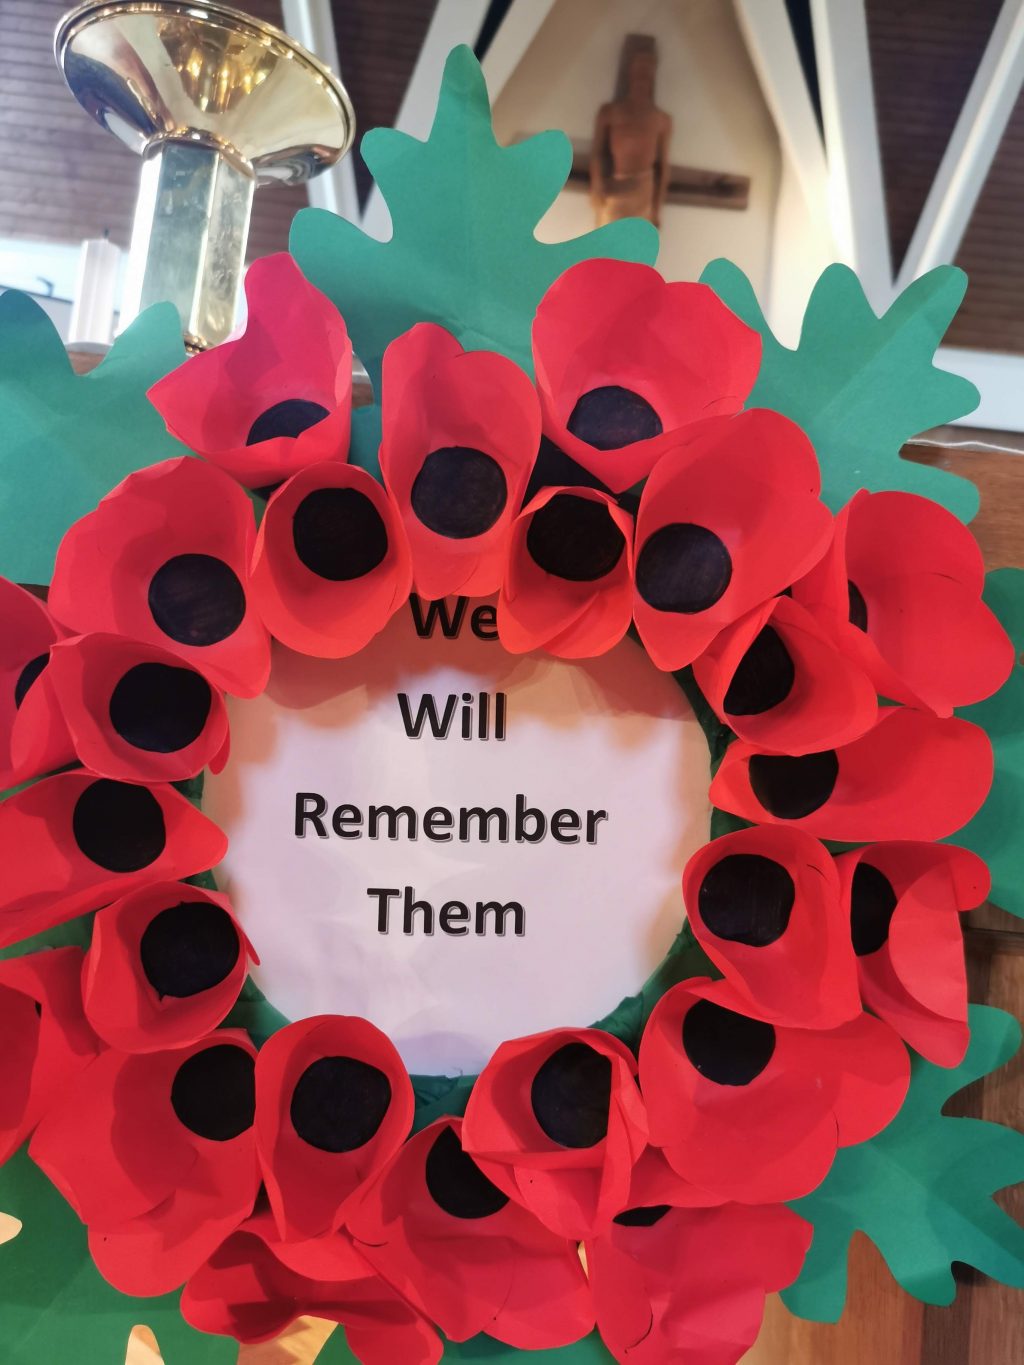 We will remember them